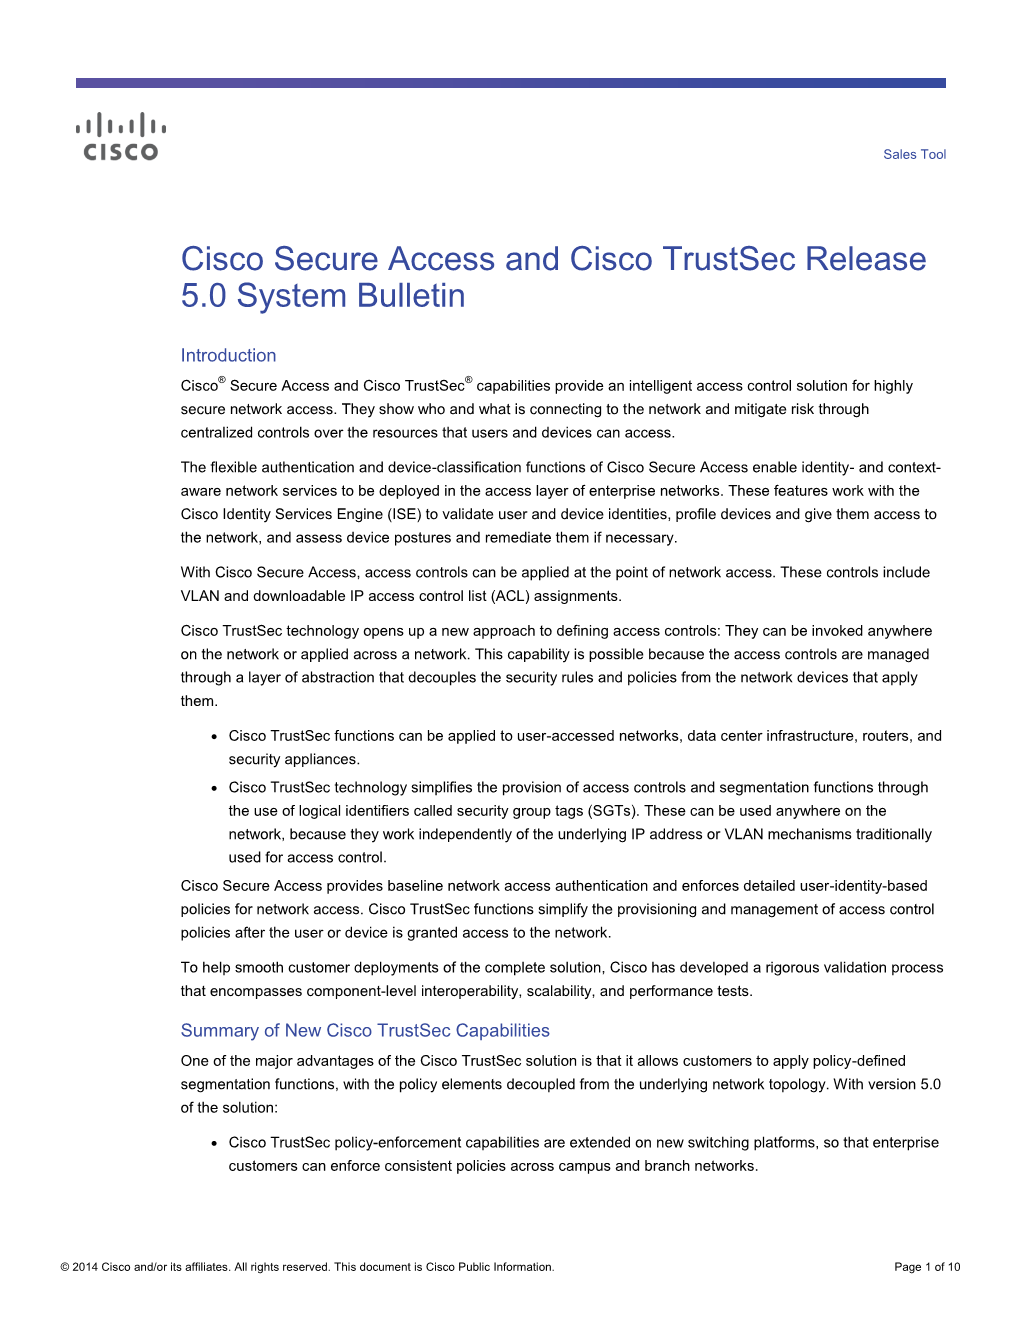 Cisco Secure Access and Cisco Trustsec Release 5.0 System Bulletin